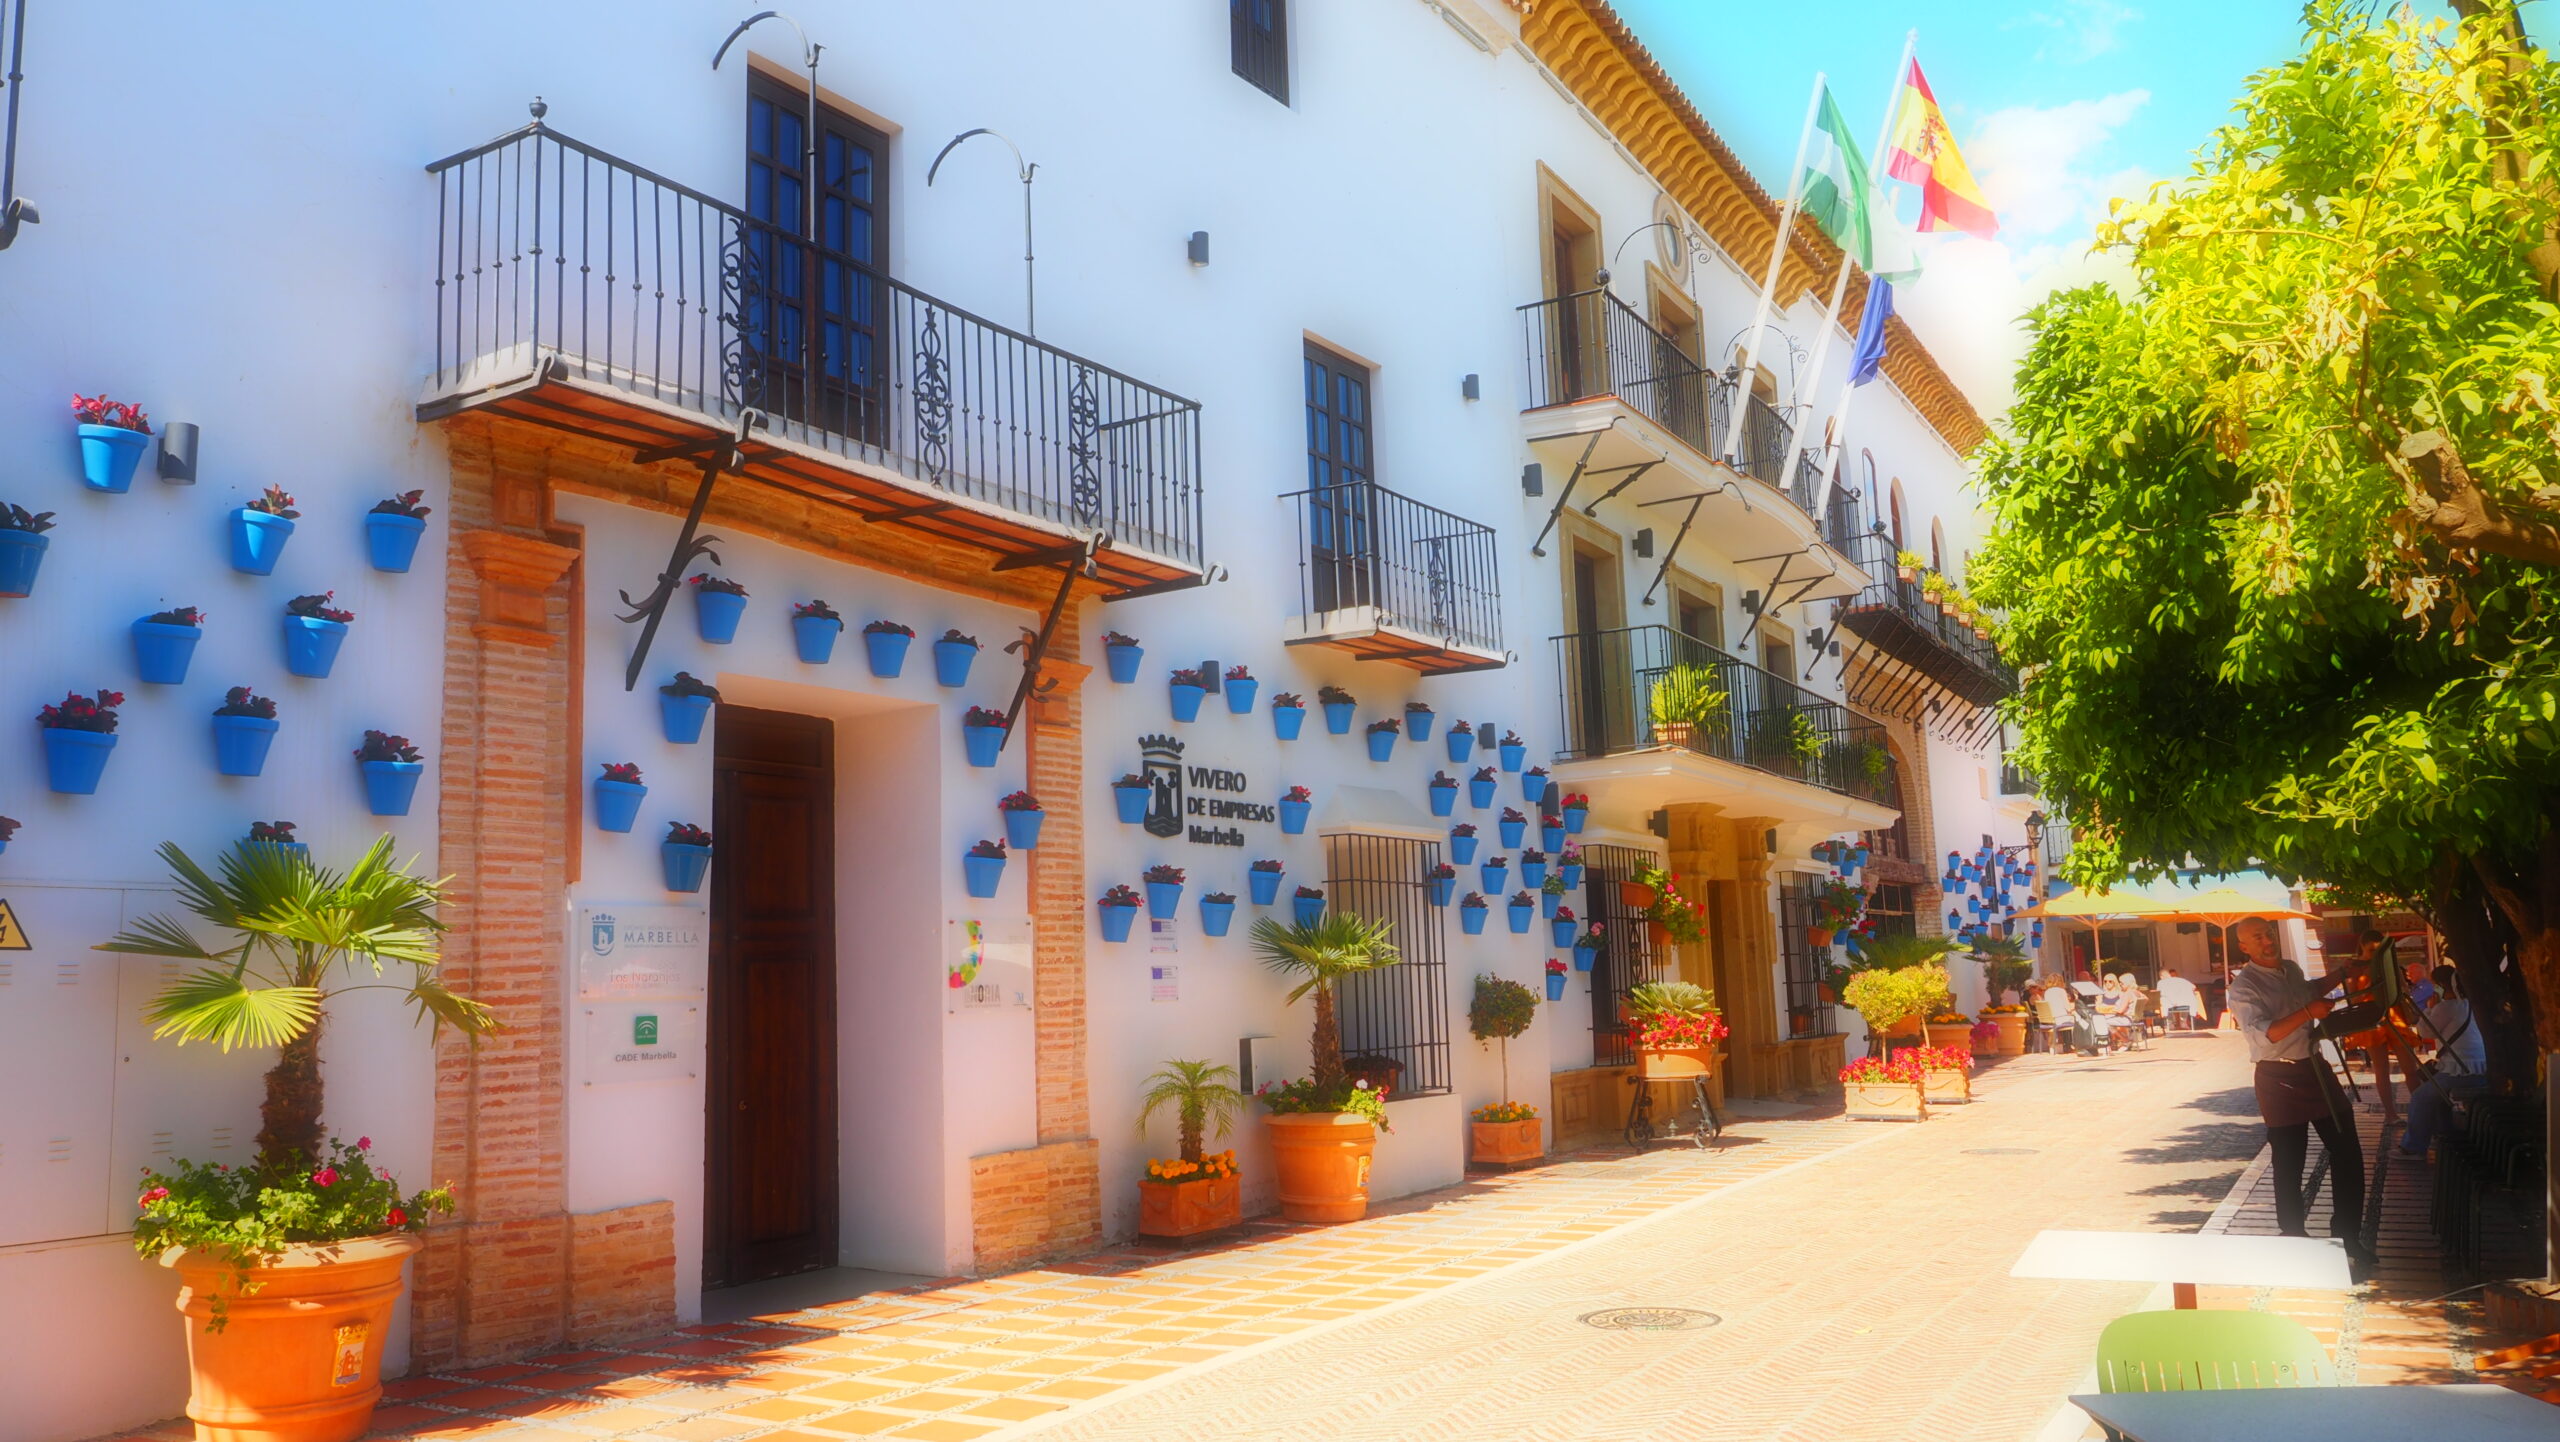 Sights, walks and other attractions in Marbella